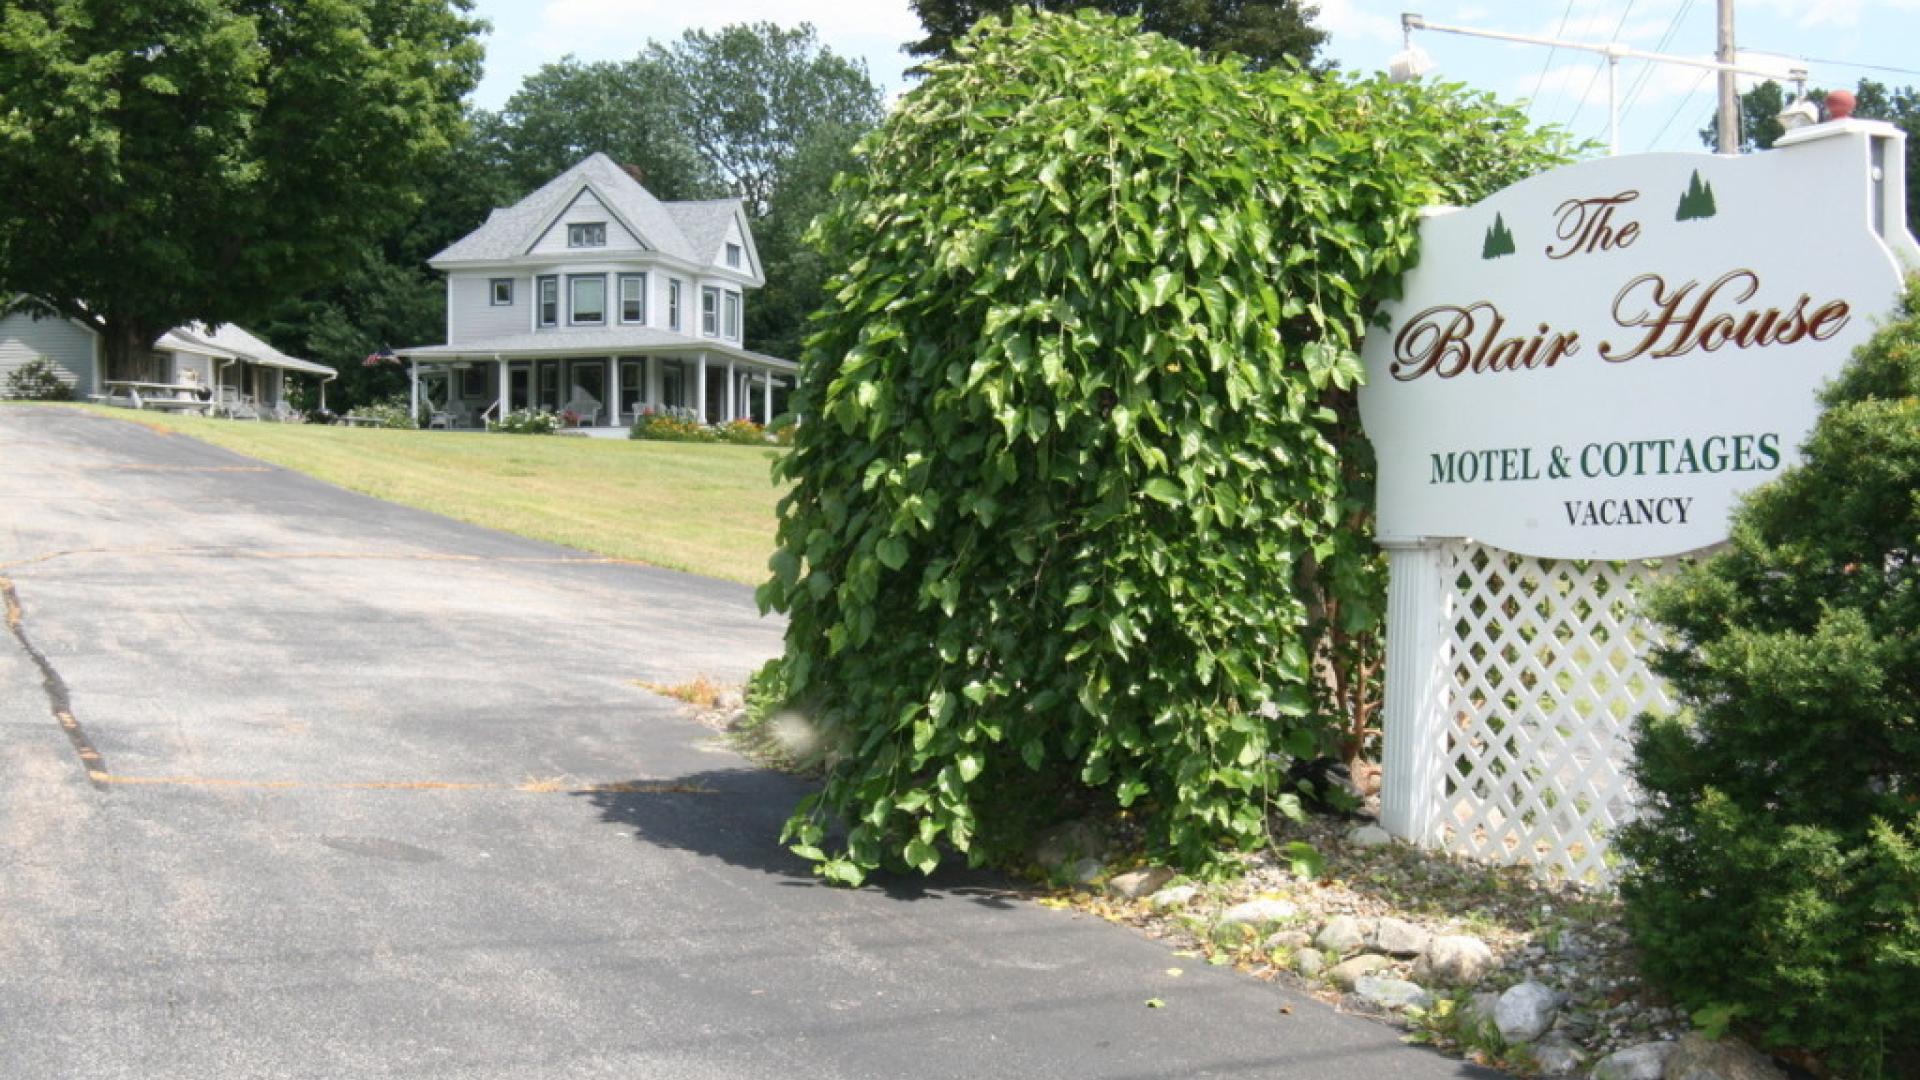 The Blair House Motel & Cottages